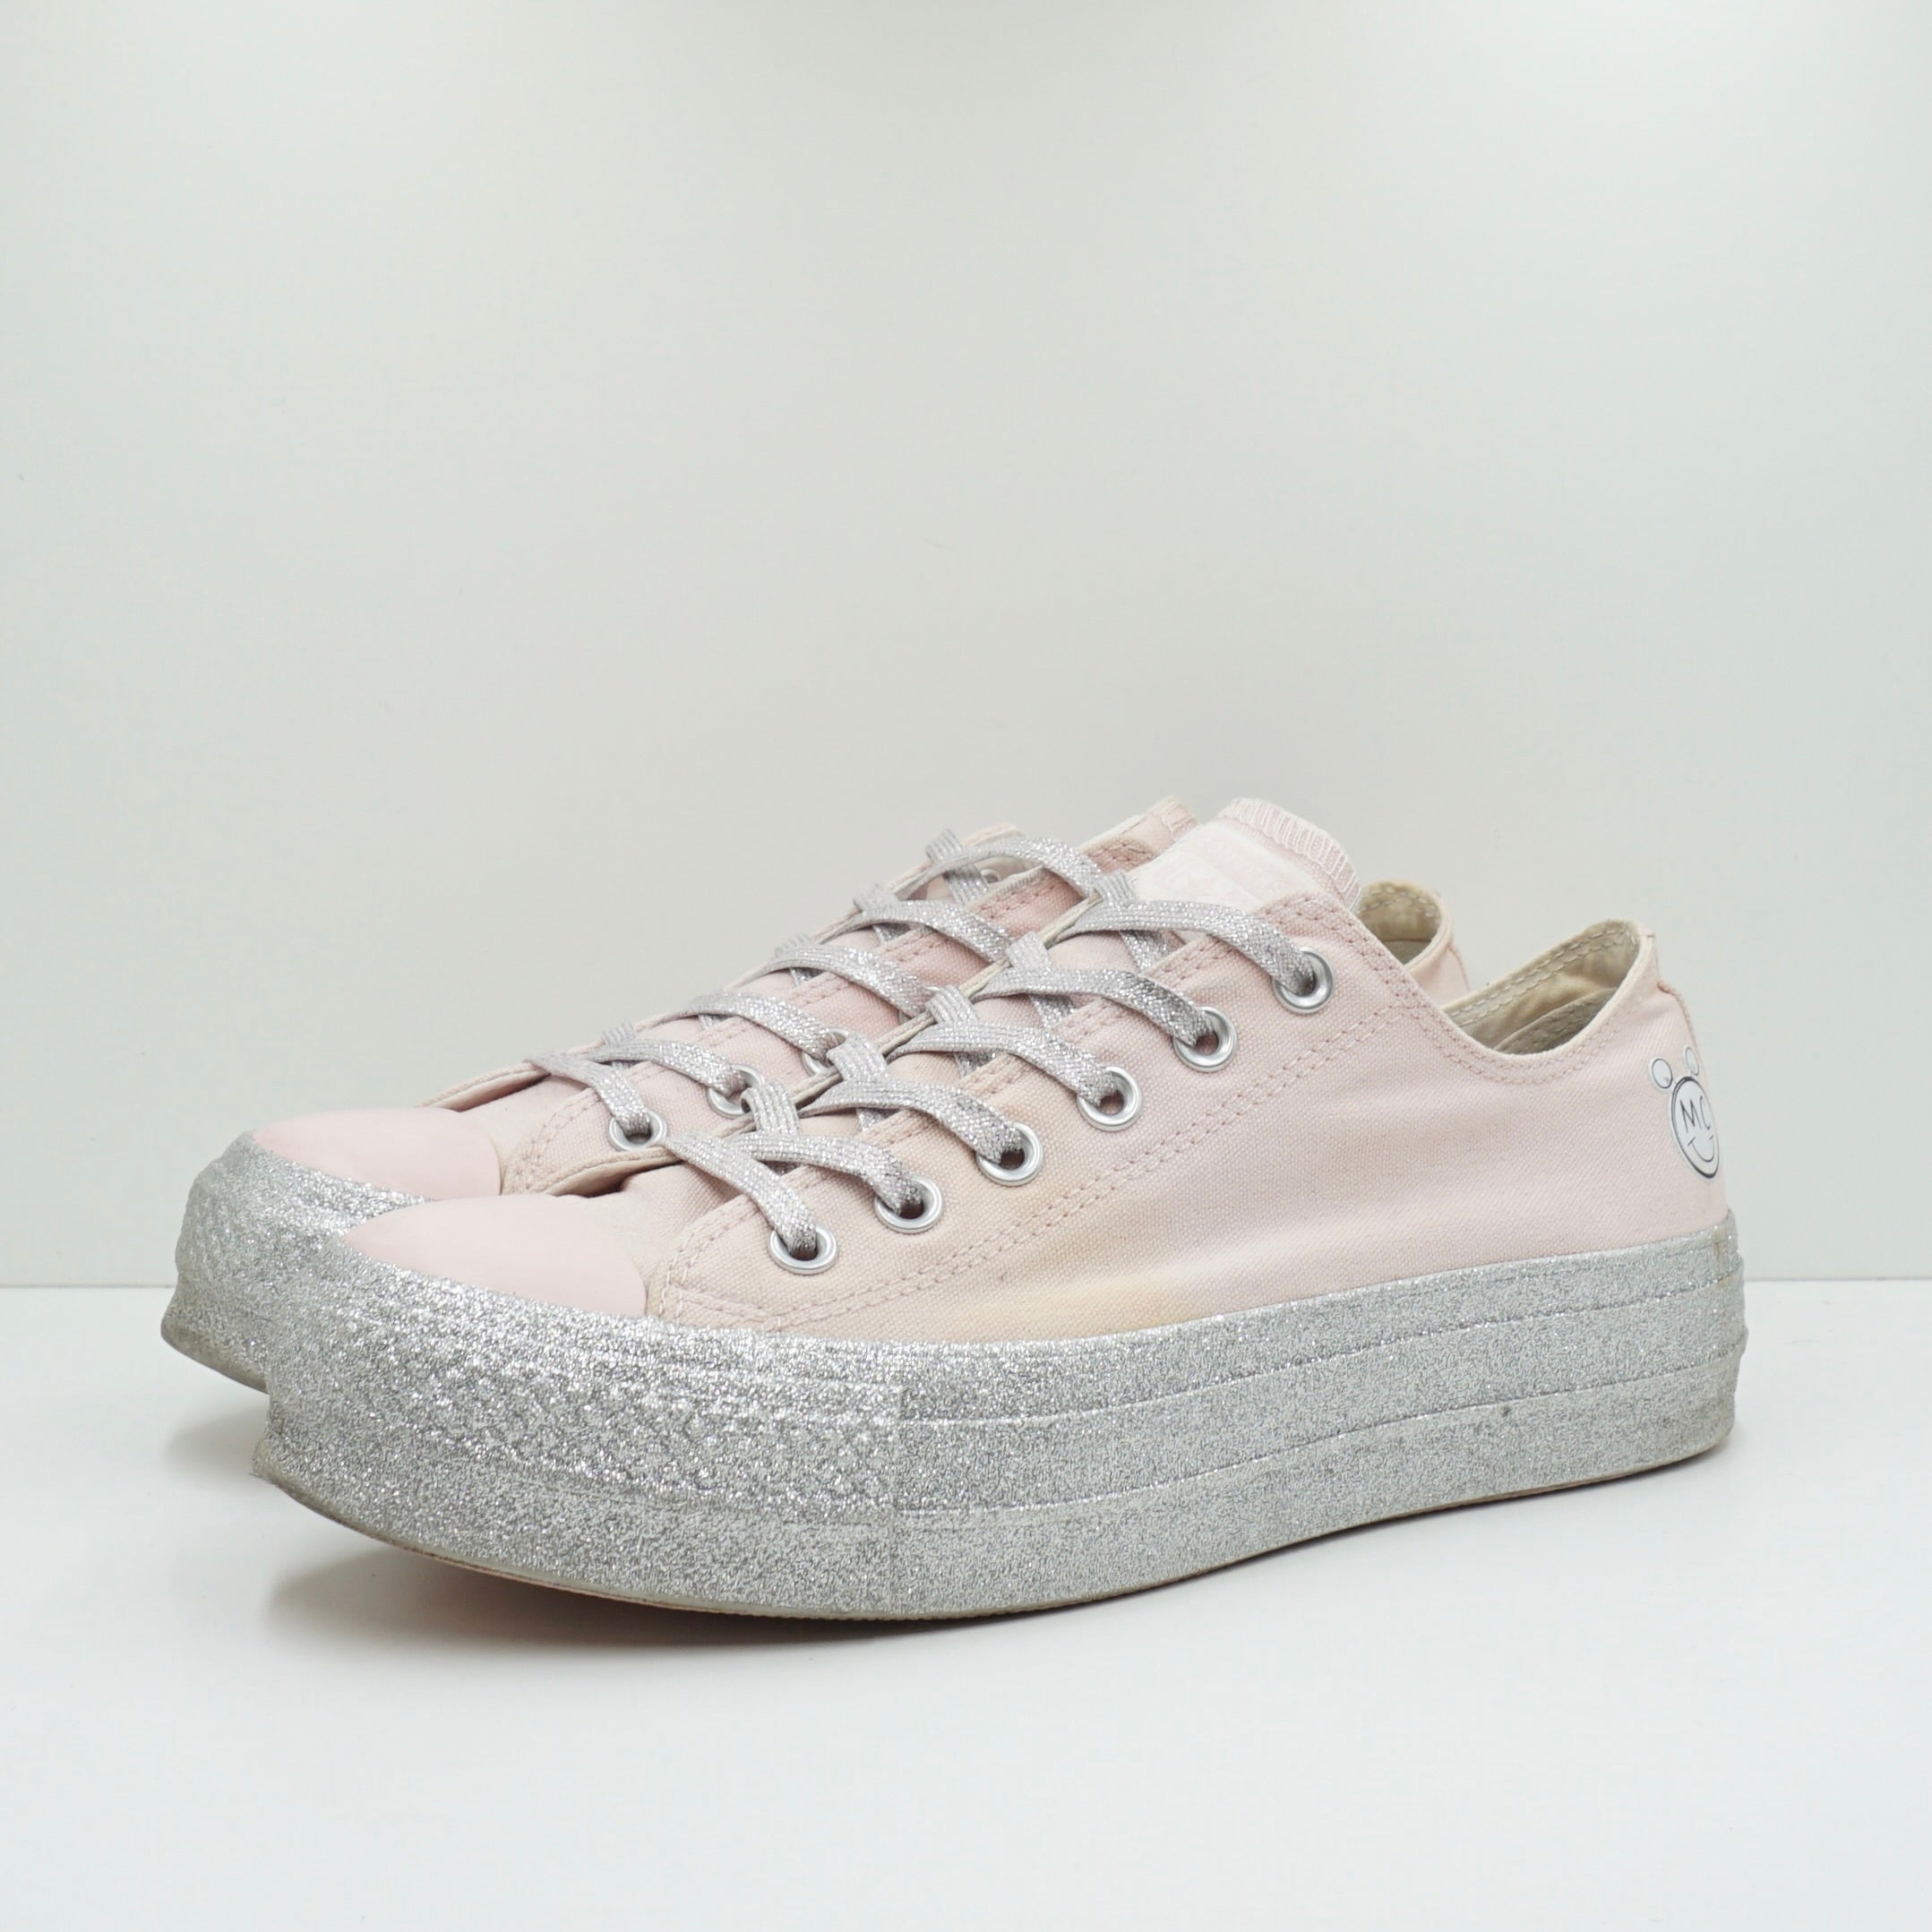 Converse Chuck Taylor All Star Lift Low Miley Cyrus Pink (W)